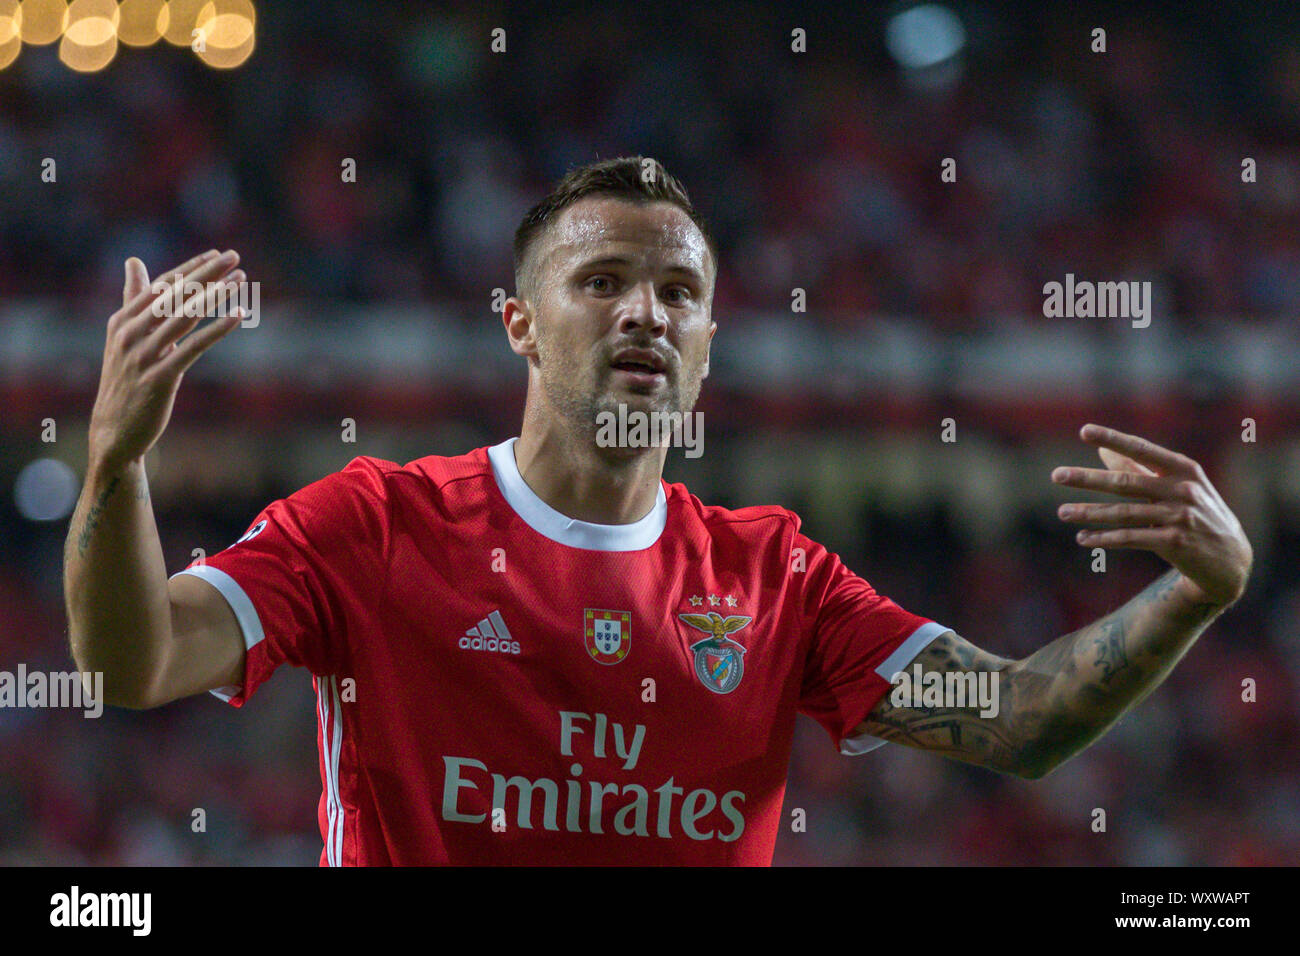 Lisbon, Portugal. 17th Sep, 2019. September 17, 2019. Lisbon, Portugal.  Benfica's forward from Switzerland Haris Seferovic (14) in action during  the game of the 1st round of Group G for the UEFA